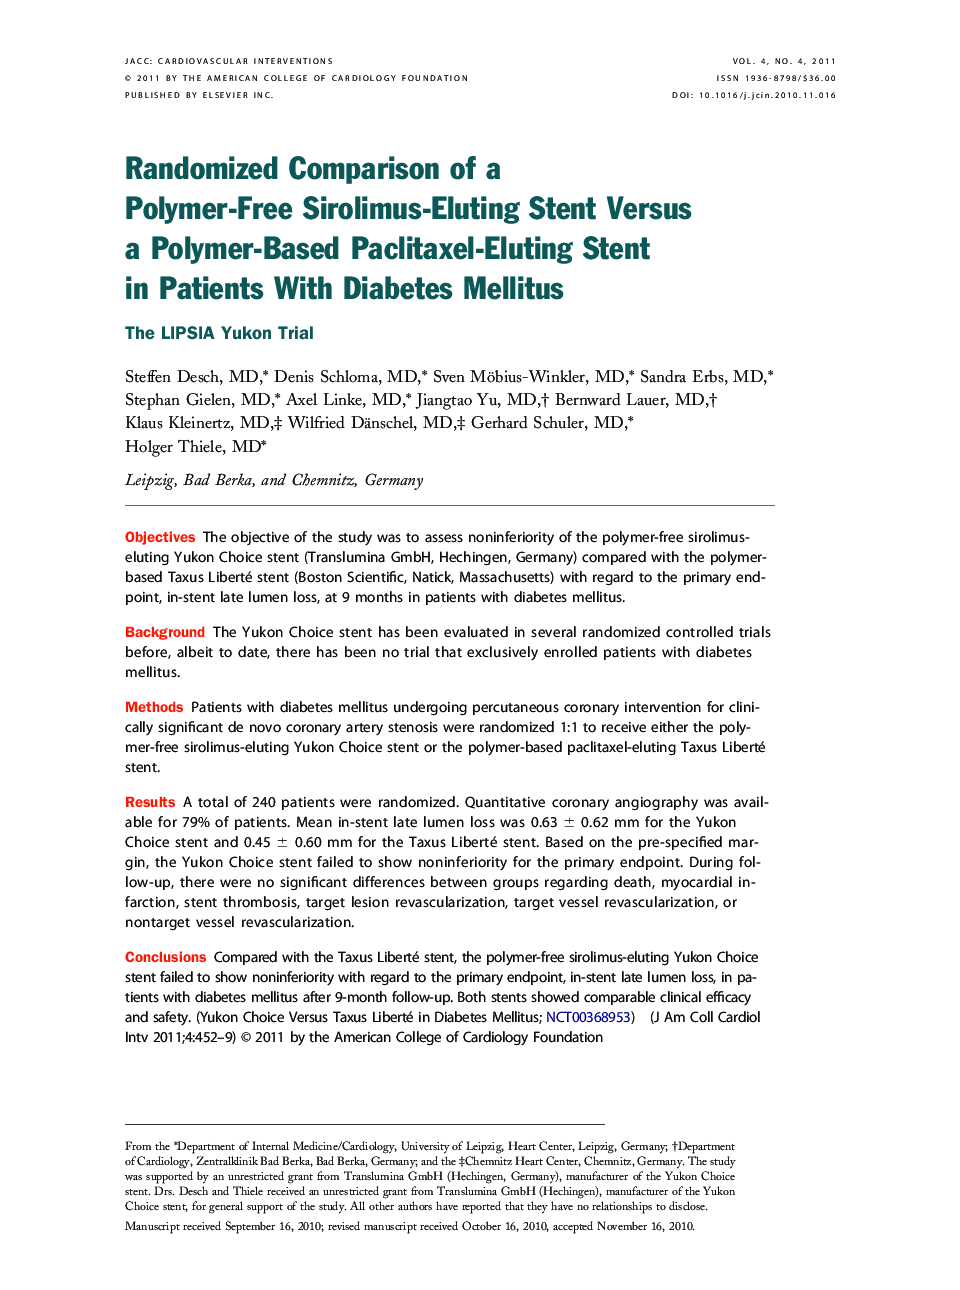 Randomized Comparison of a Polymer-Free Sirolimus-Eluting Stent Versus a Polymer-Based Paclitaxel-Eluting Stent in Patients With Diabetes Mellitus : The LIPSIA Yukon Trial